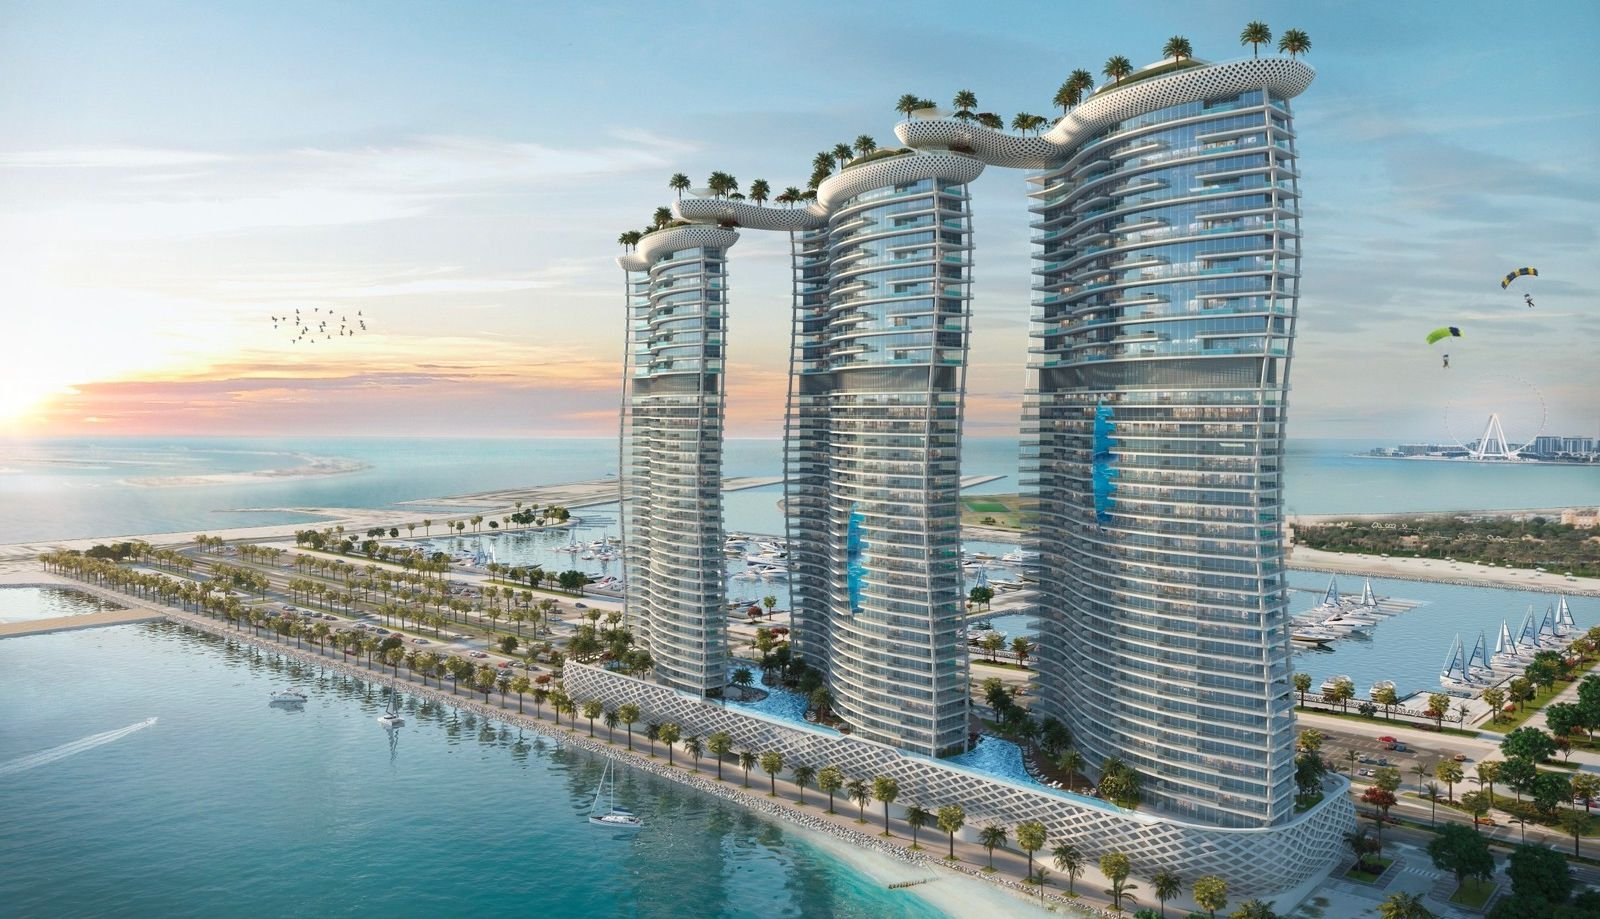 Dubai branded residences boom as construction double by 2030